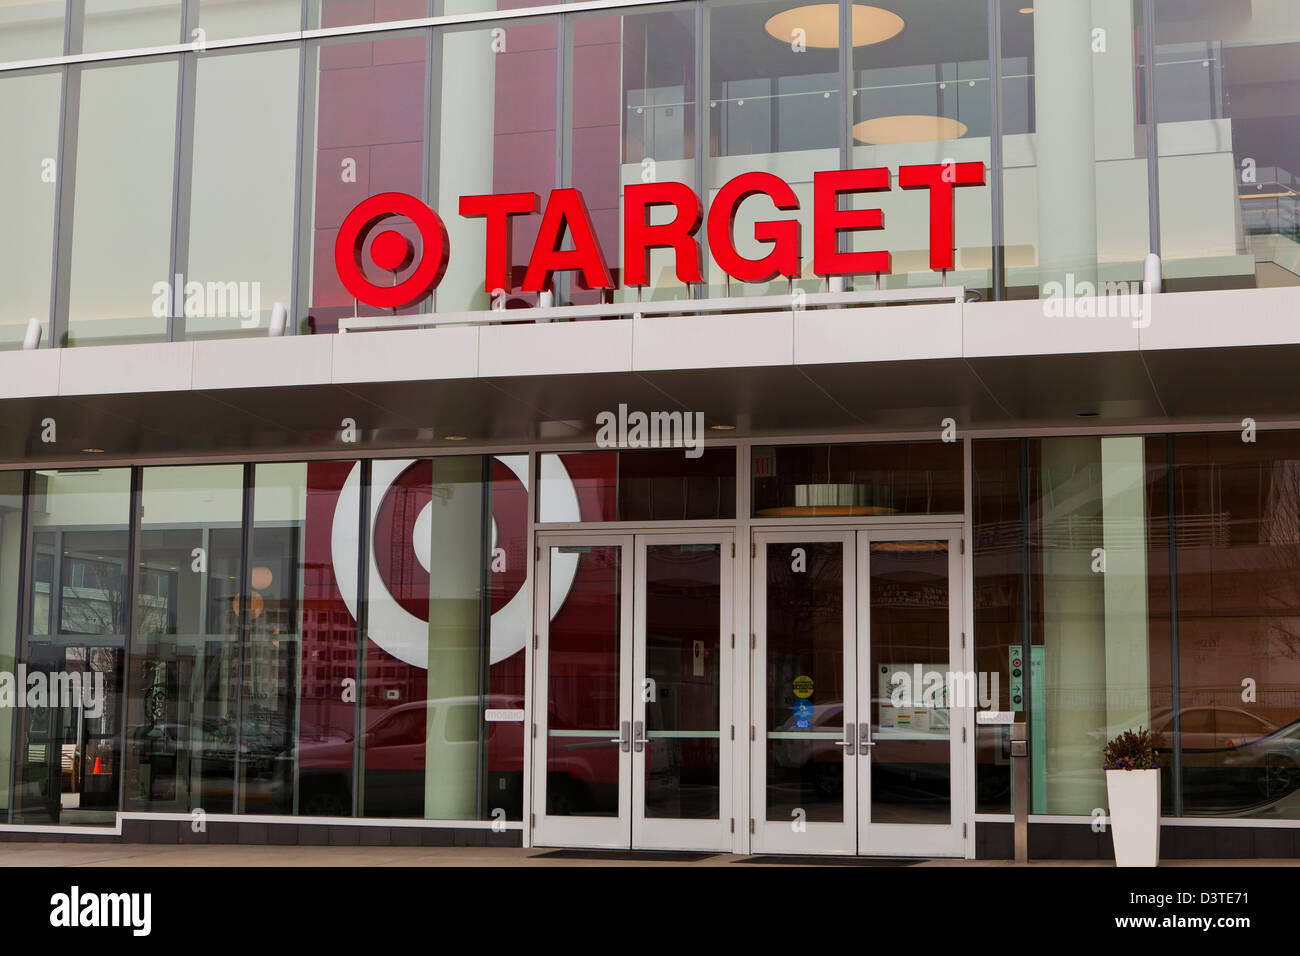 Target storefront sign Stock Photo